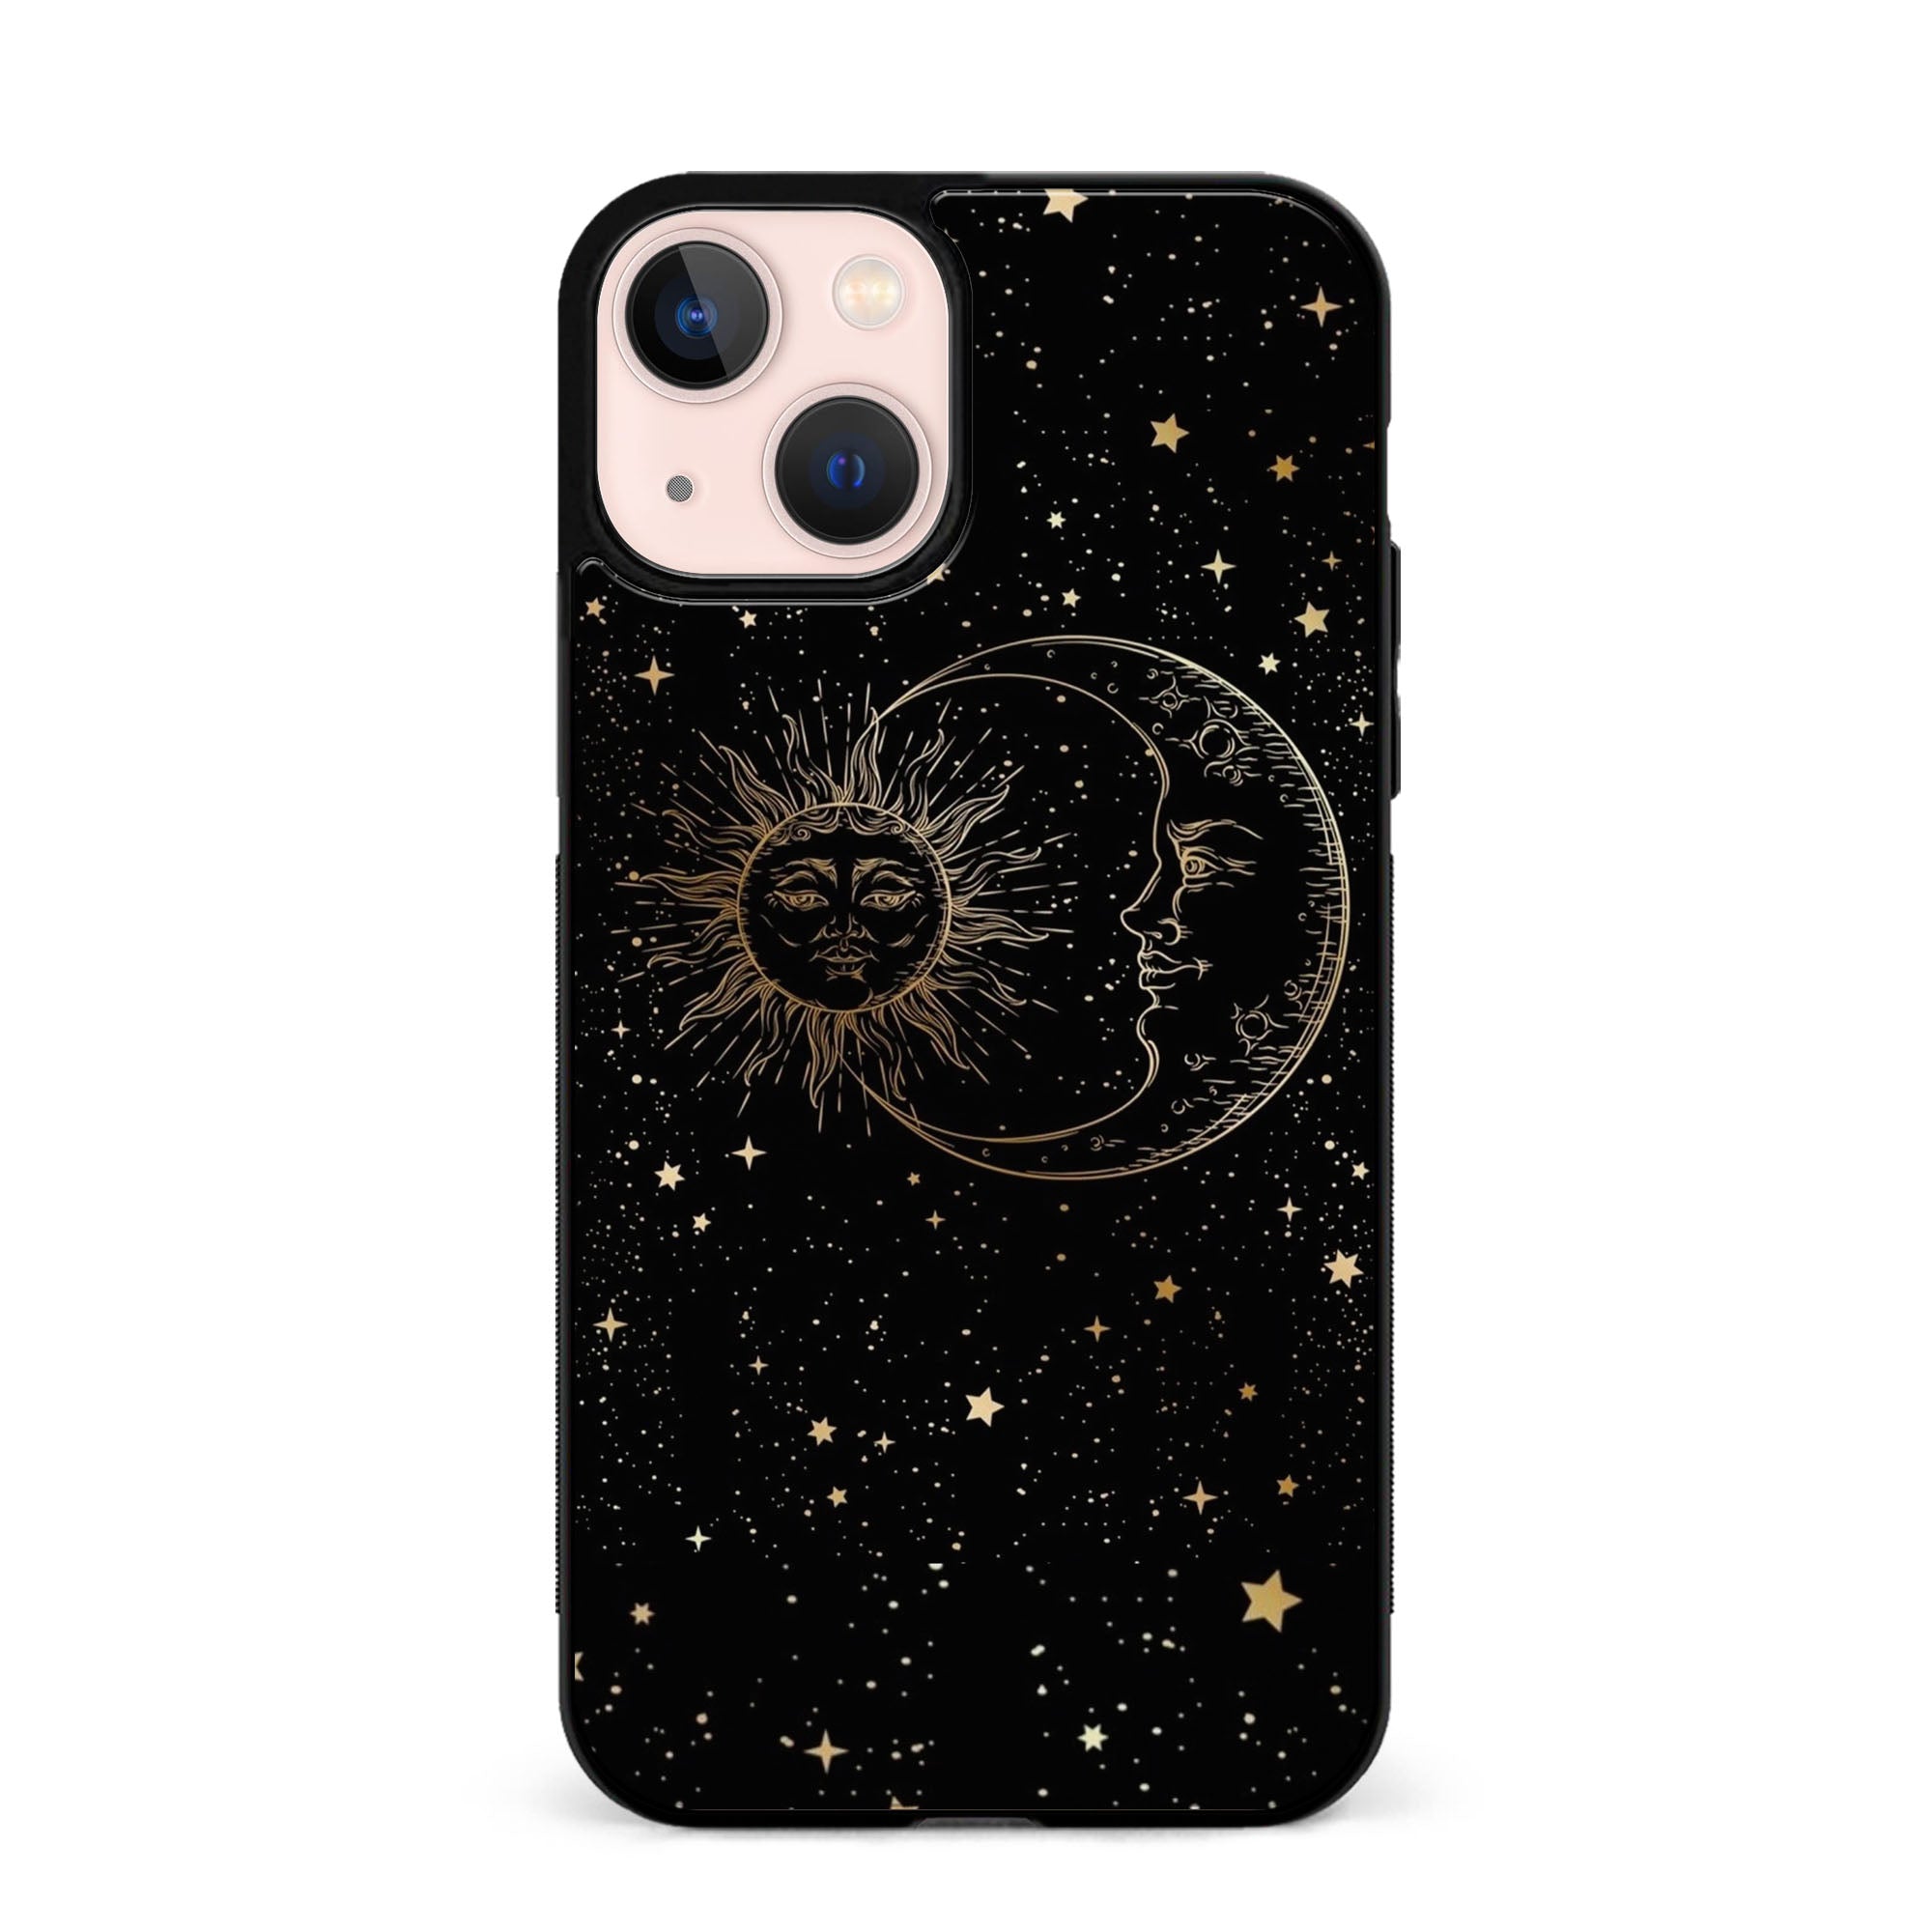 Celestial Moons & Stars Rubber Phone Case for iPhone, Samsung, Huawei & Pixel